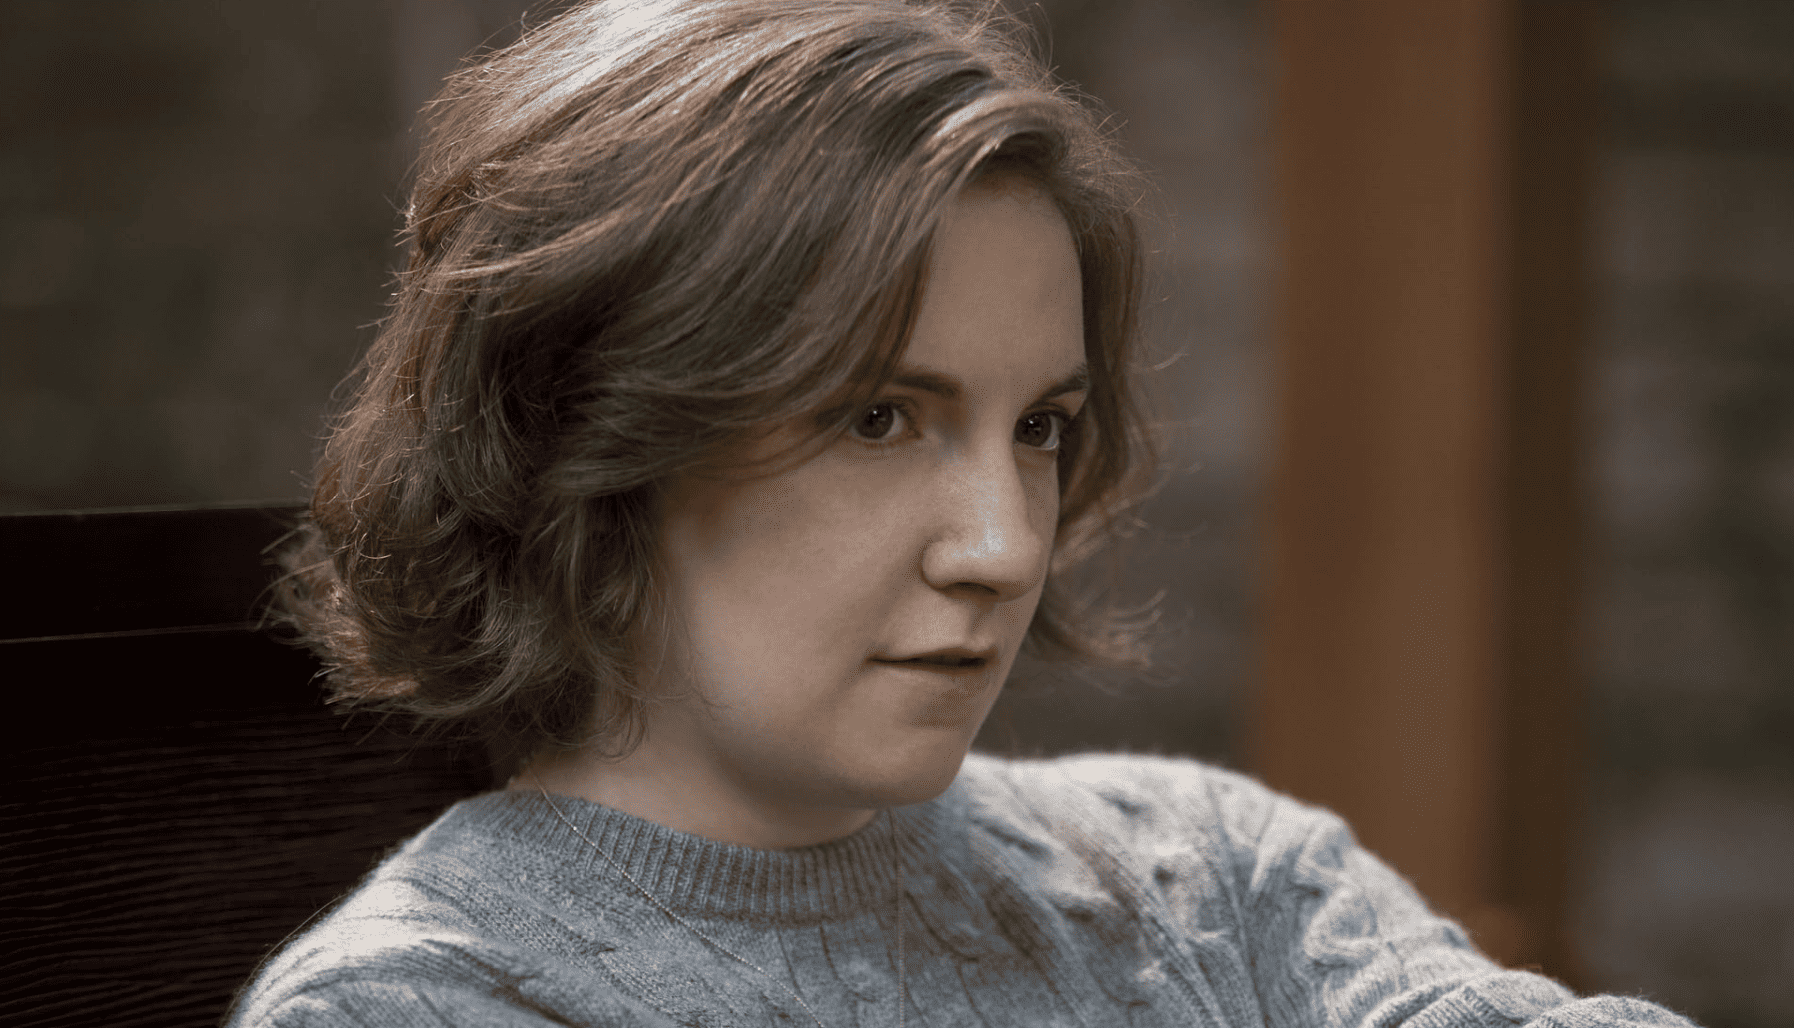 A pensive Lena Dunham as Hannah Horvath stares intently into the distance in this image from Apatow Productions